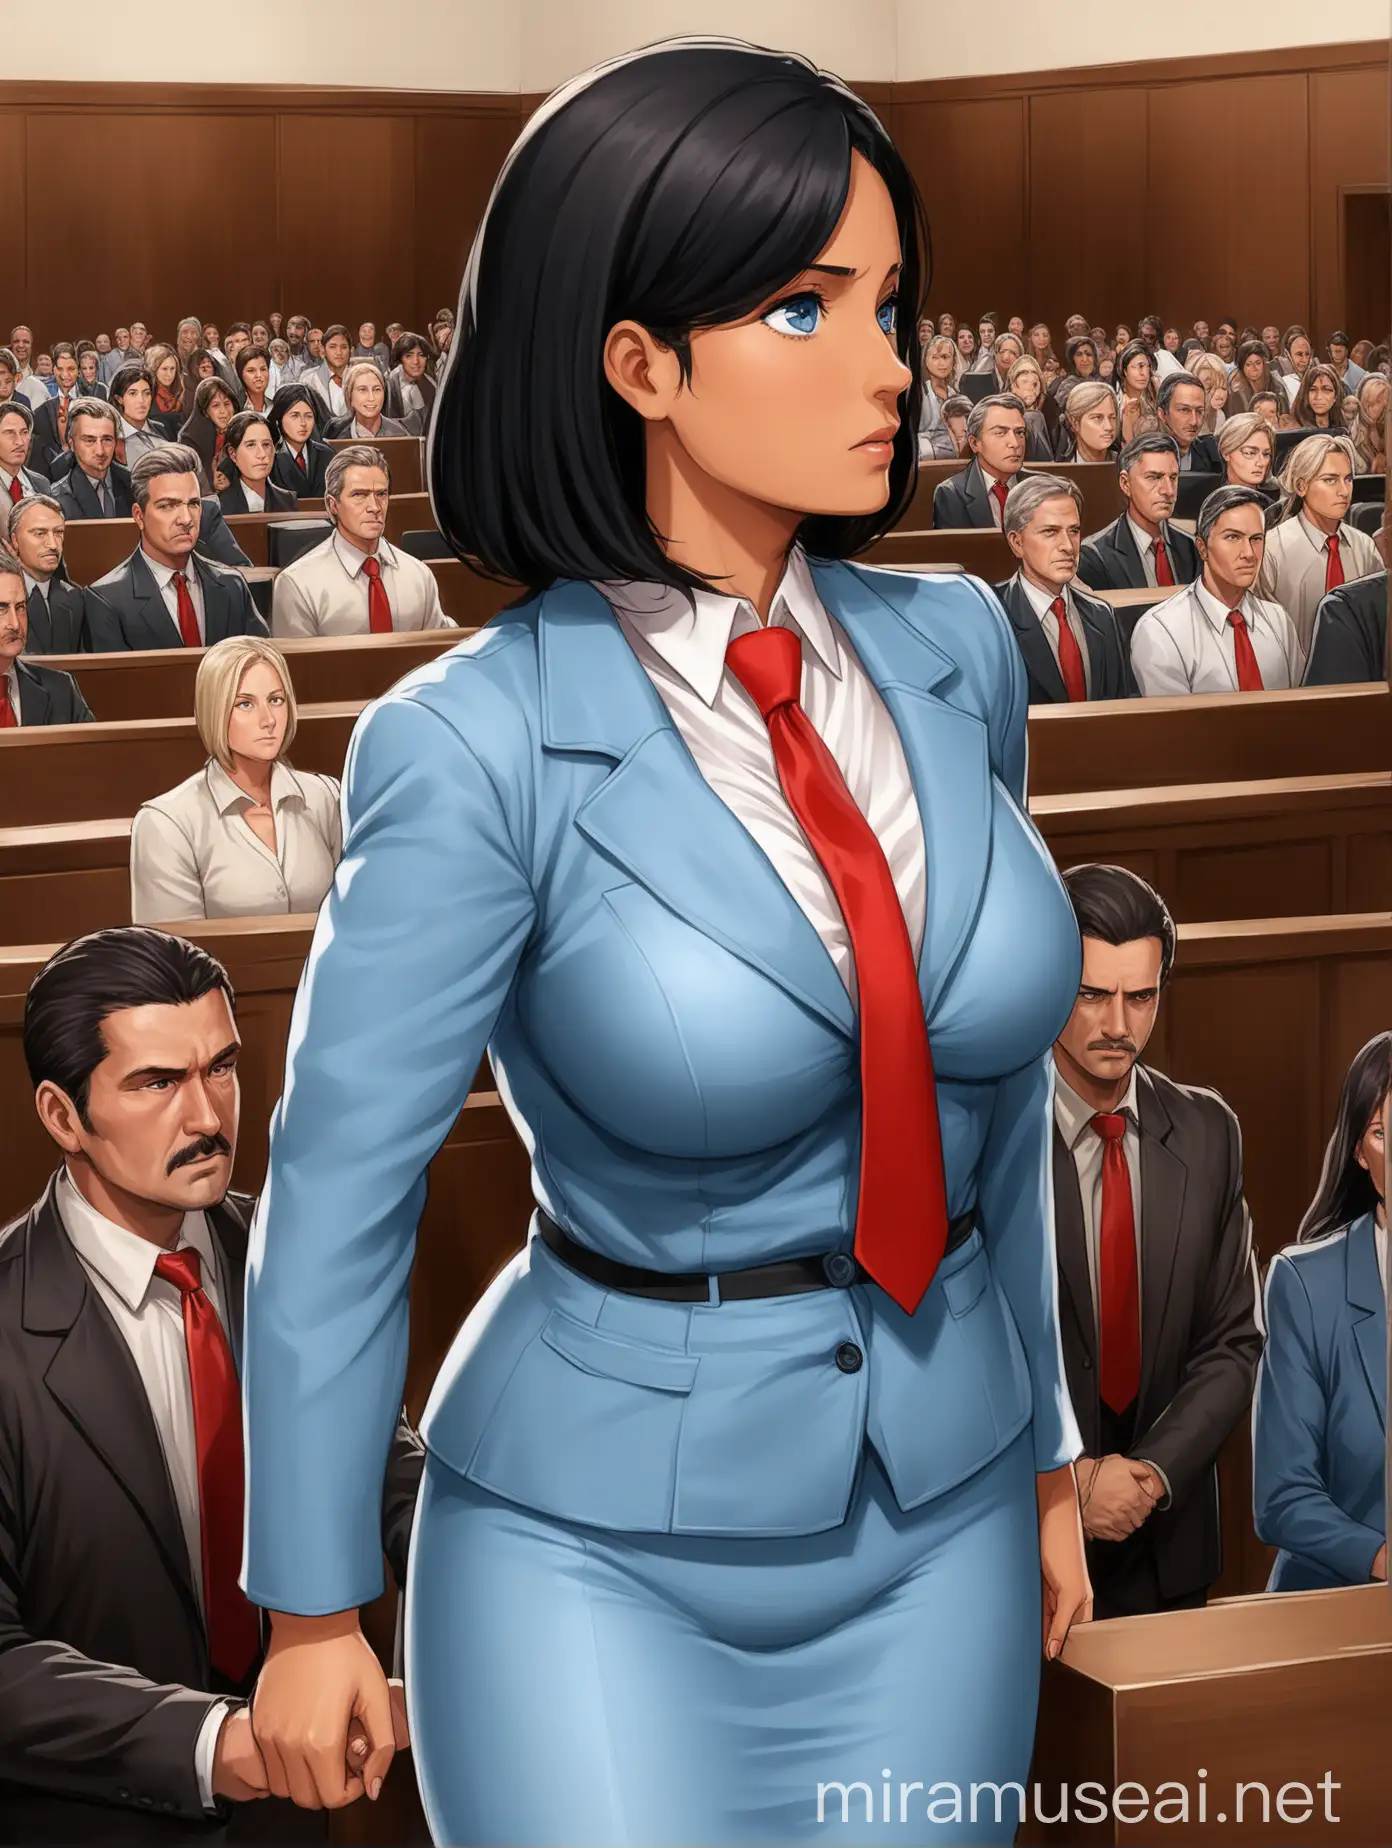 A mature woman; probably 35 years old; with mid black styled hair, light tanned complexion, dark blue eyes; tall but slightly curvy figure; wears a light blue skirtsuit, a white dress shirt tucked in her skirt, red necktie, brown pantyhose and black leather heels; she is in a court room with a lot of spectators, she is a lawyer protecting passionately her client;